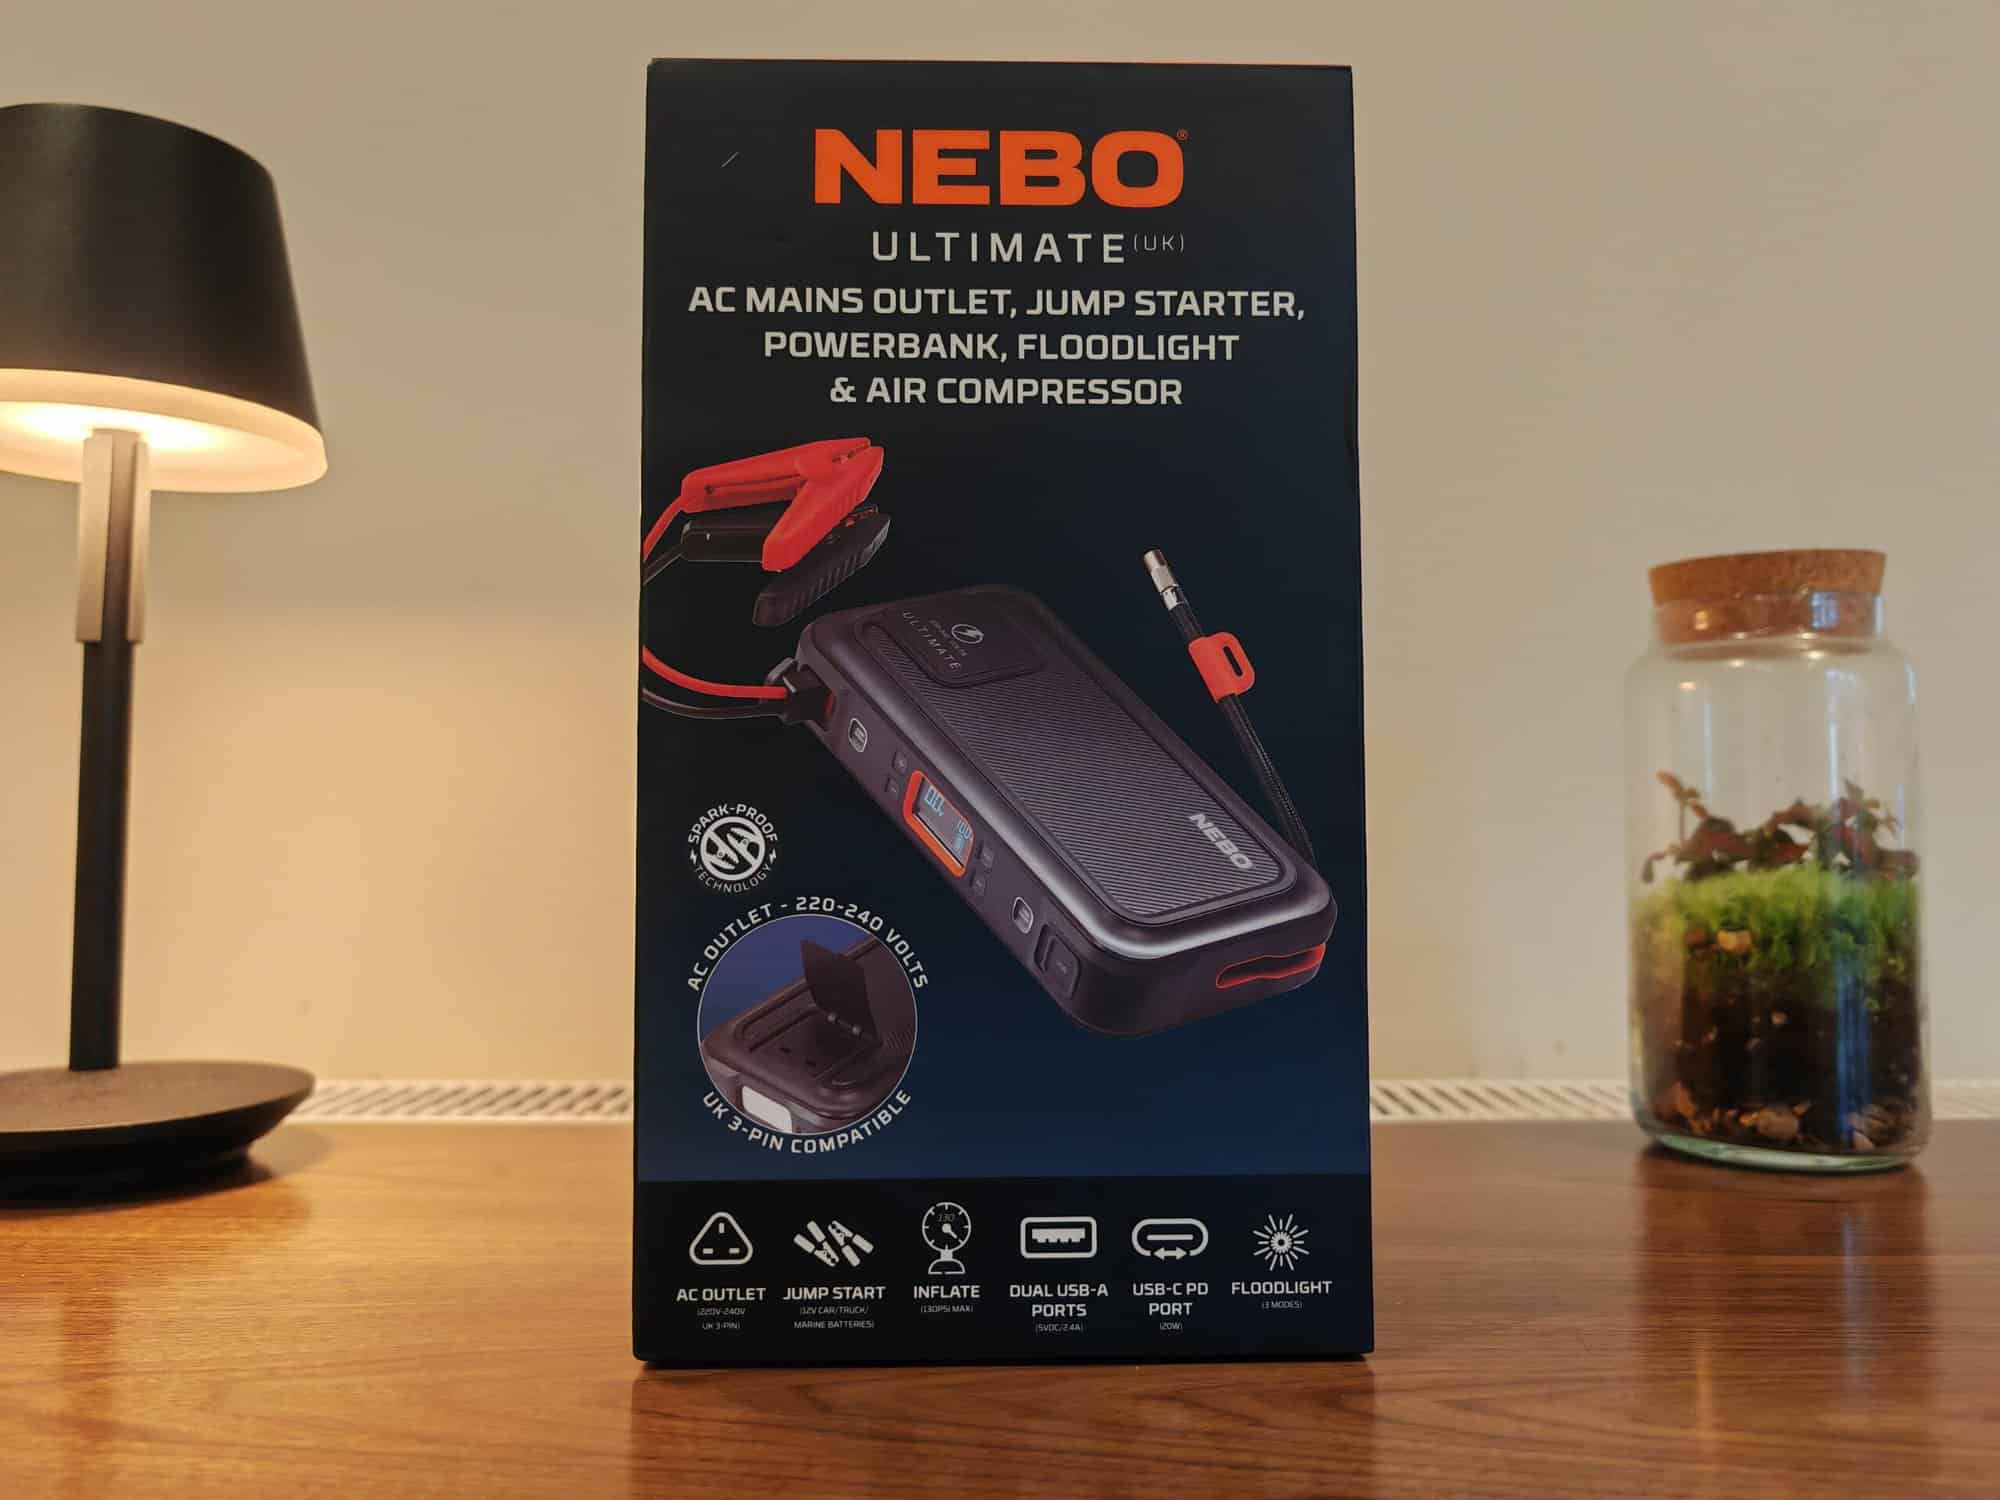 Nebo Ultimate Multi Voltage Power Pack Review – An innovative power bank with a 1500A jump start, 130psi air compressor, AC outlet, USB ports and floodlight